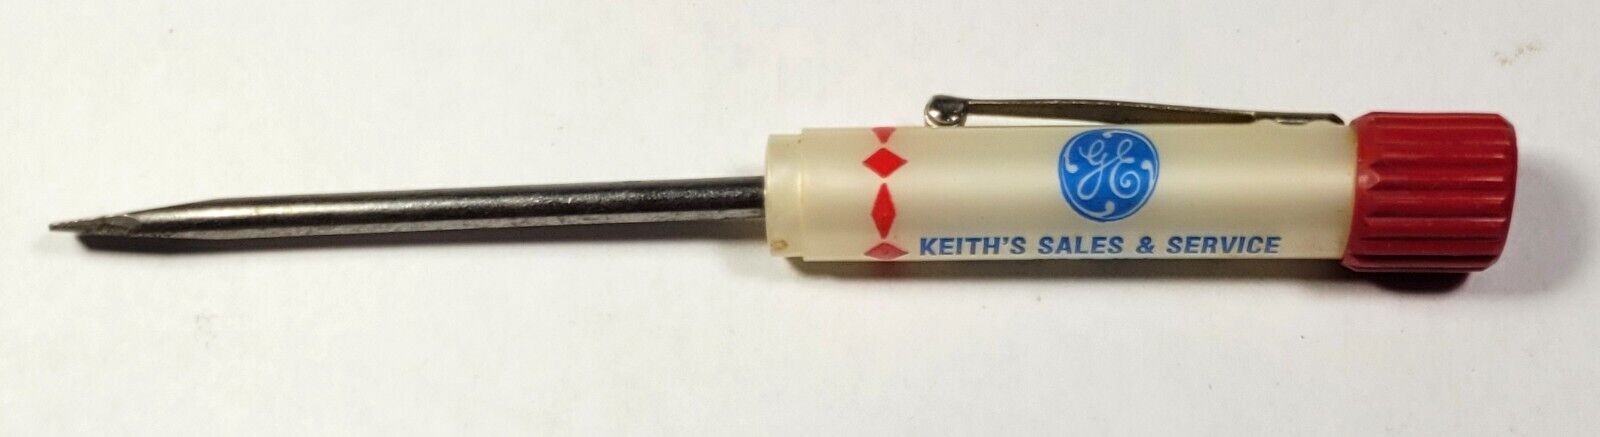 GE Keiths Sales & Service Robinson IL Vintage Ready Tool Advertising Screwdriver